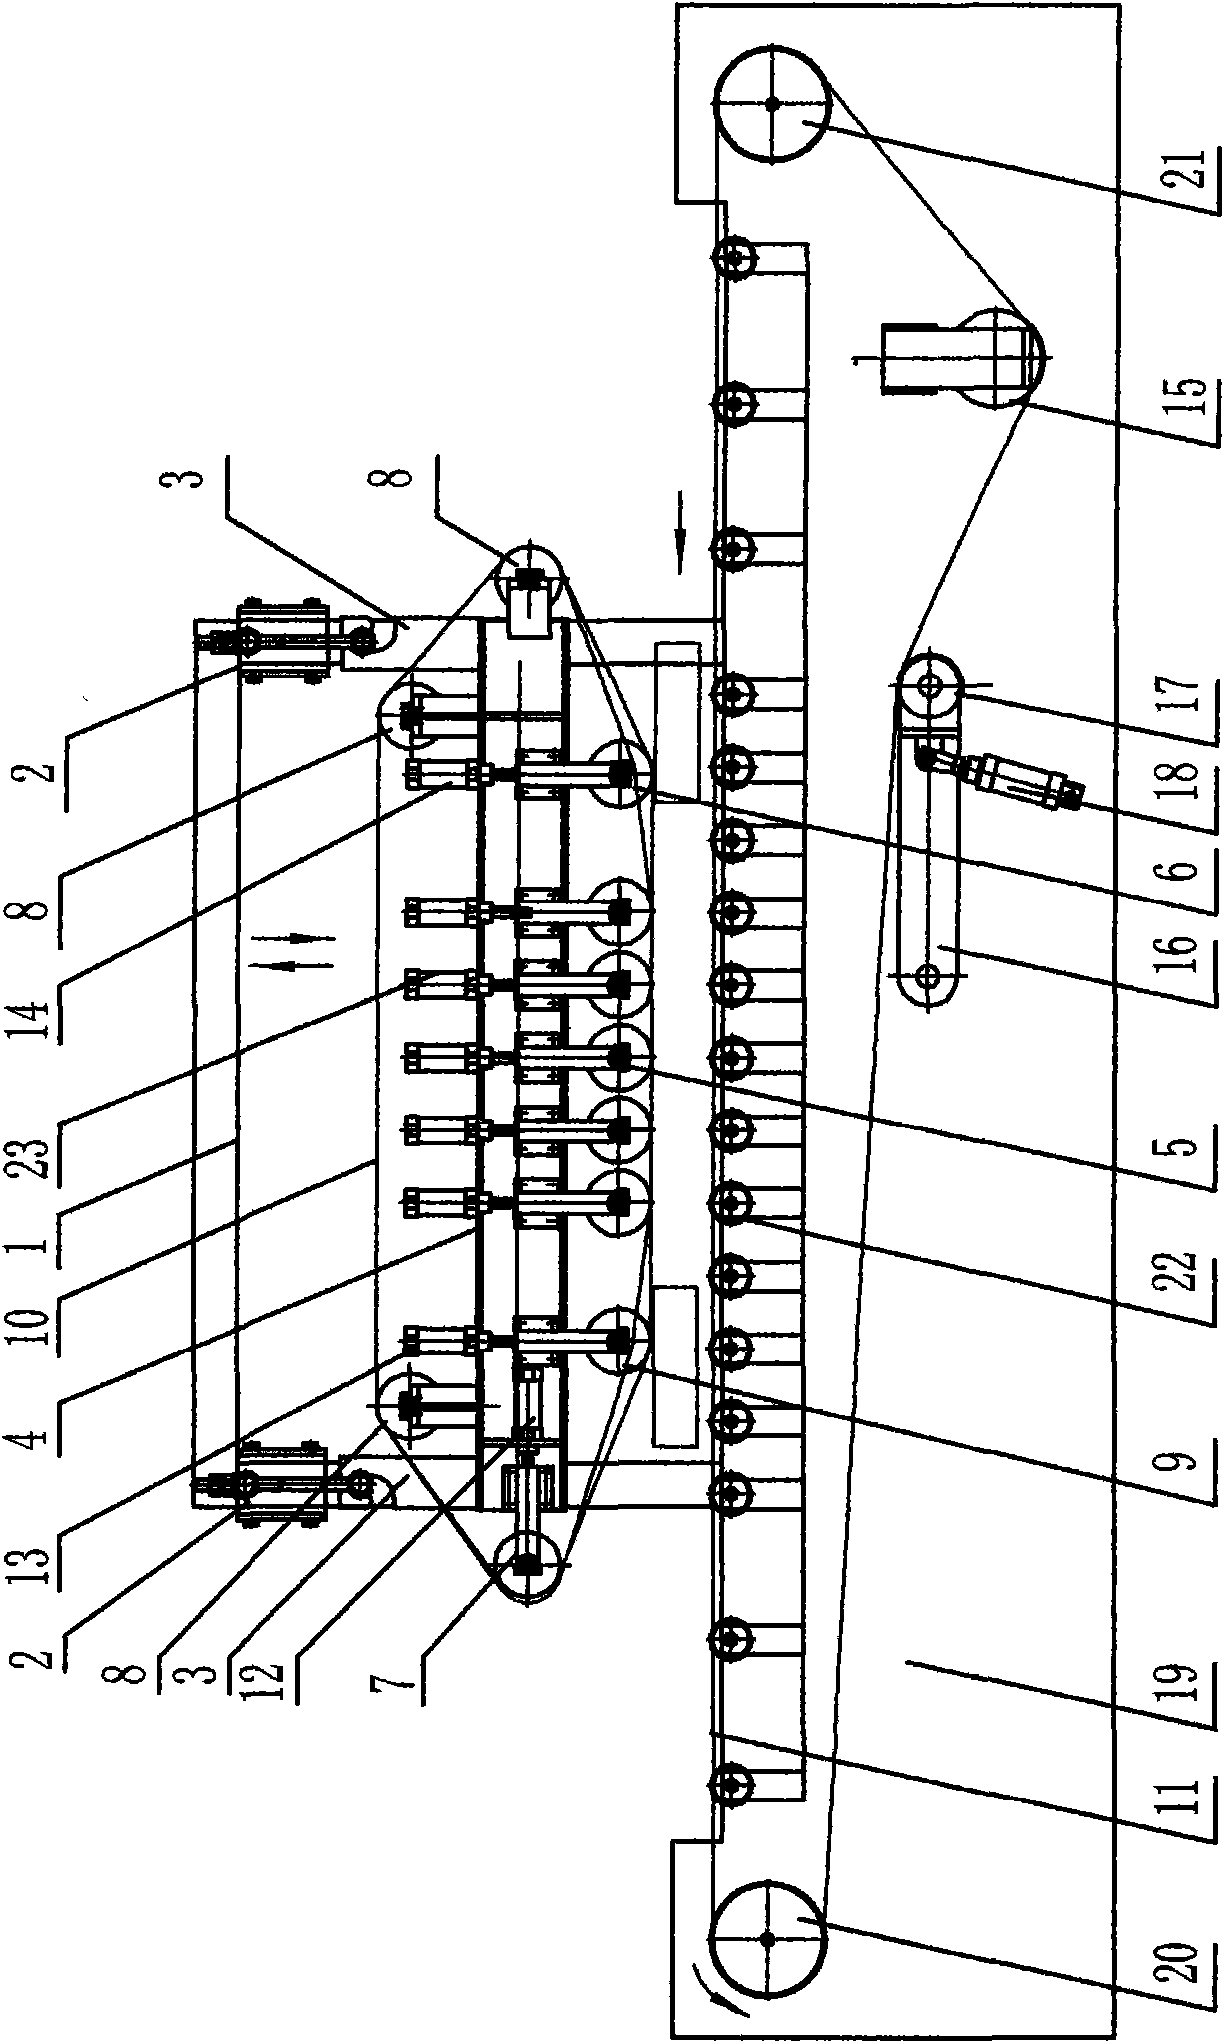 Full-automatic continuous conveying mechanism with automatic compacting device